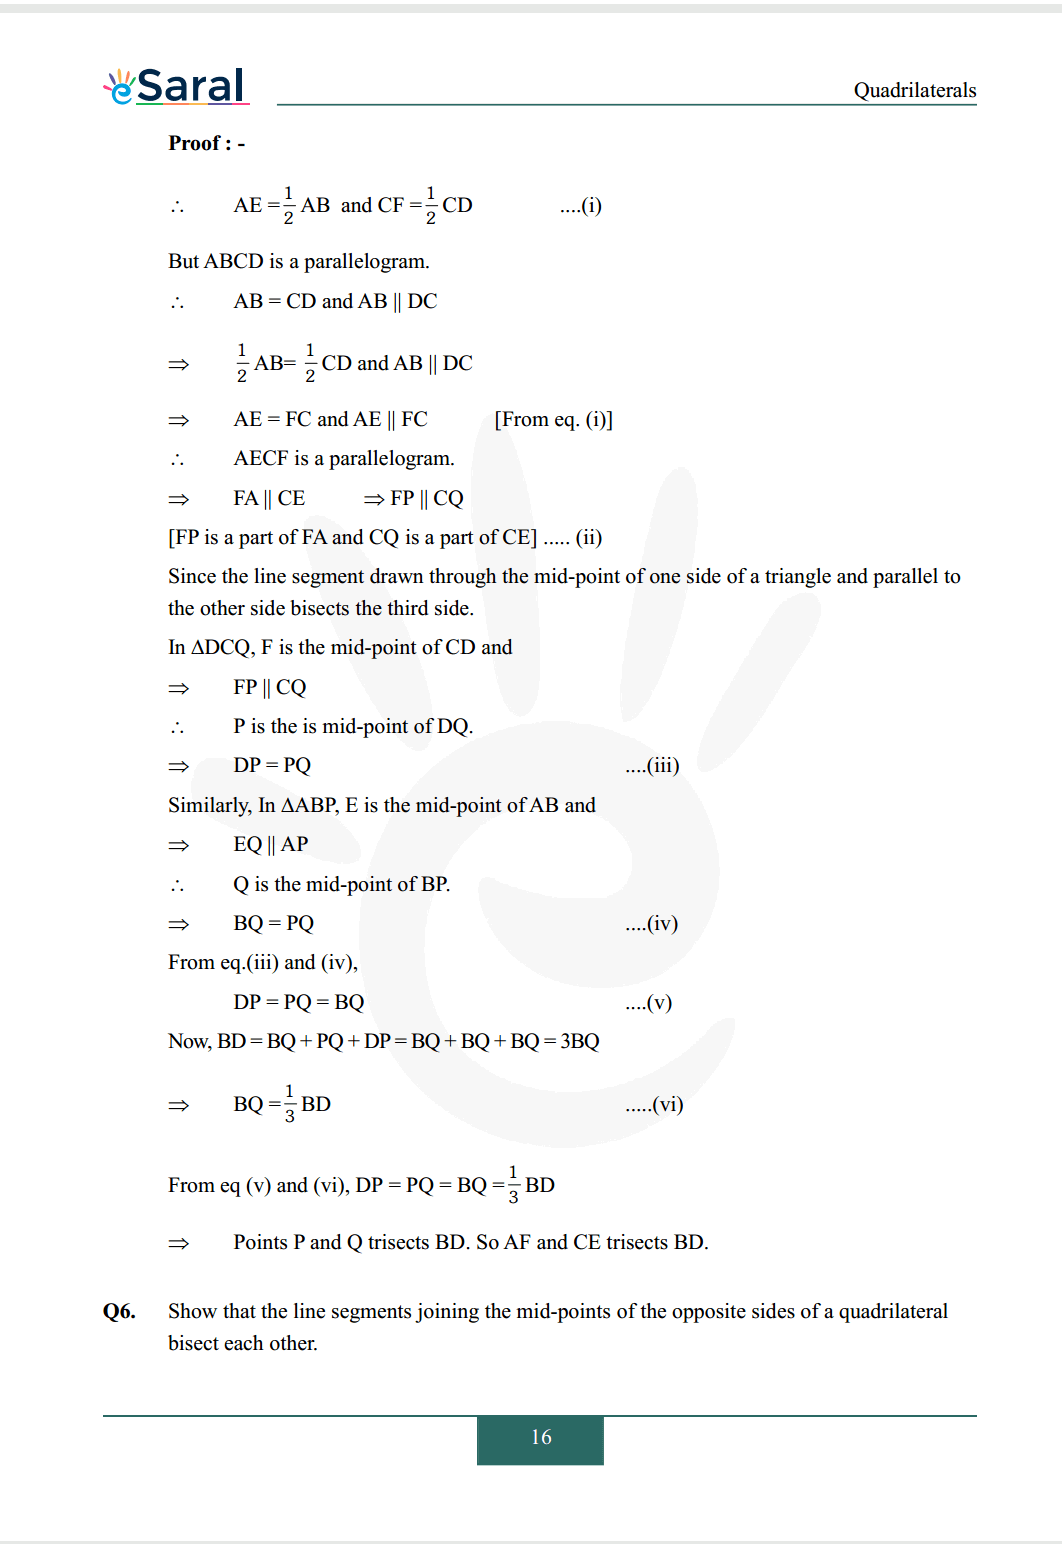 Class 9 maths chapter 8 exercise 8.2 solutions Image 5